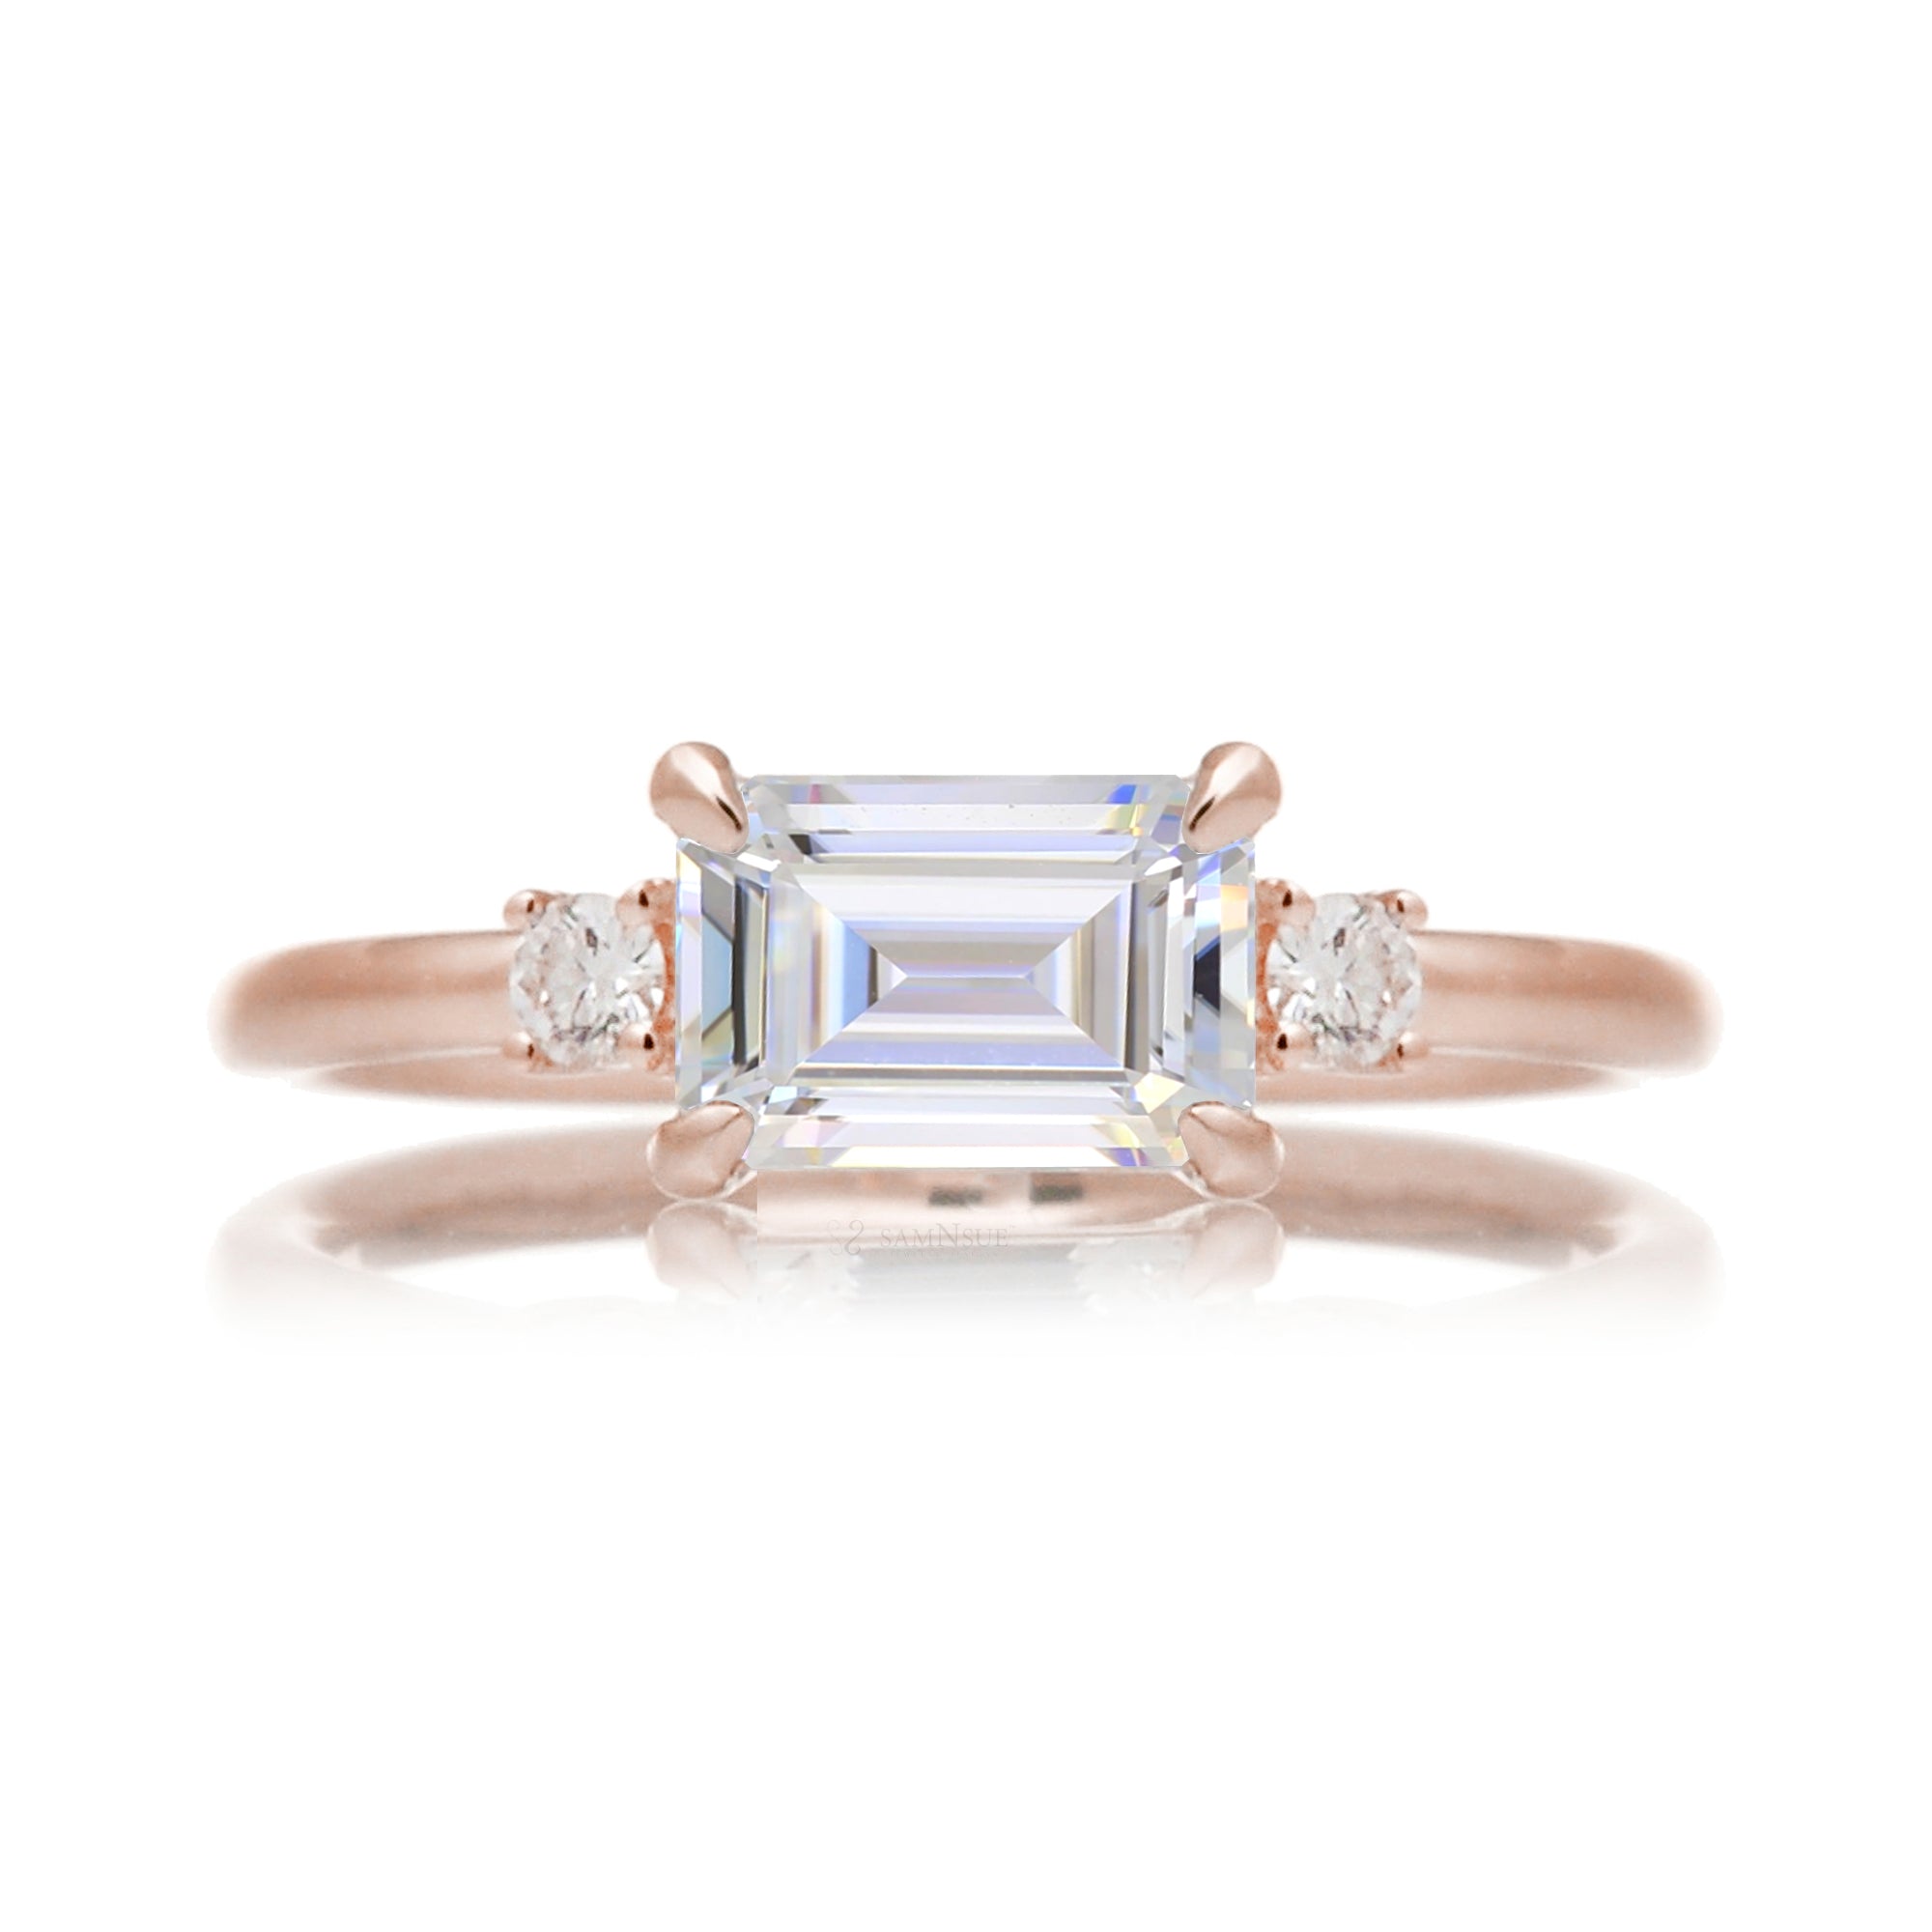 Emerald step cut moissanite three stone east-west ring the Lena rose gold